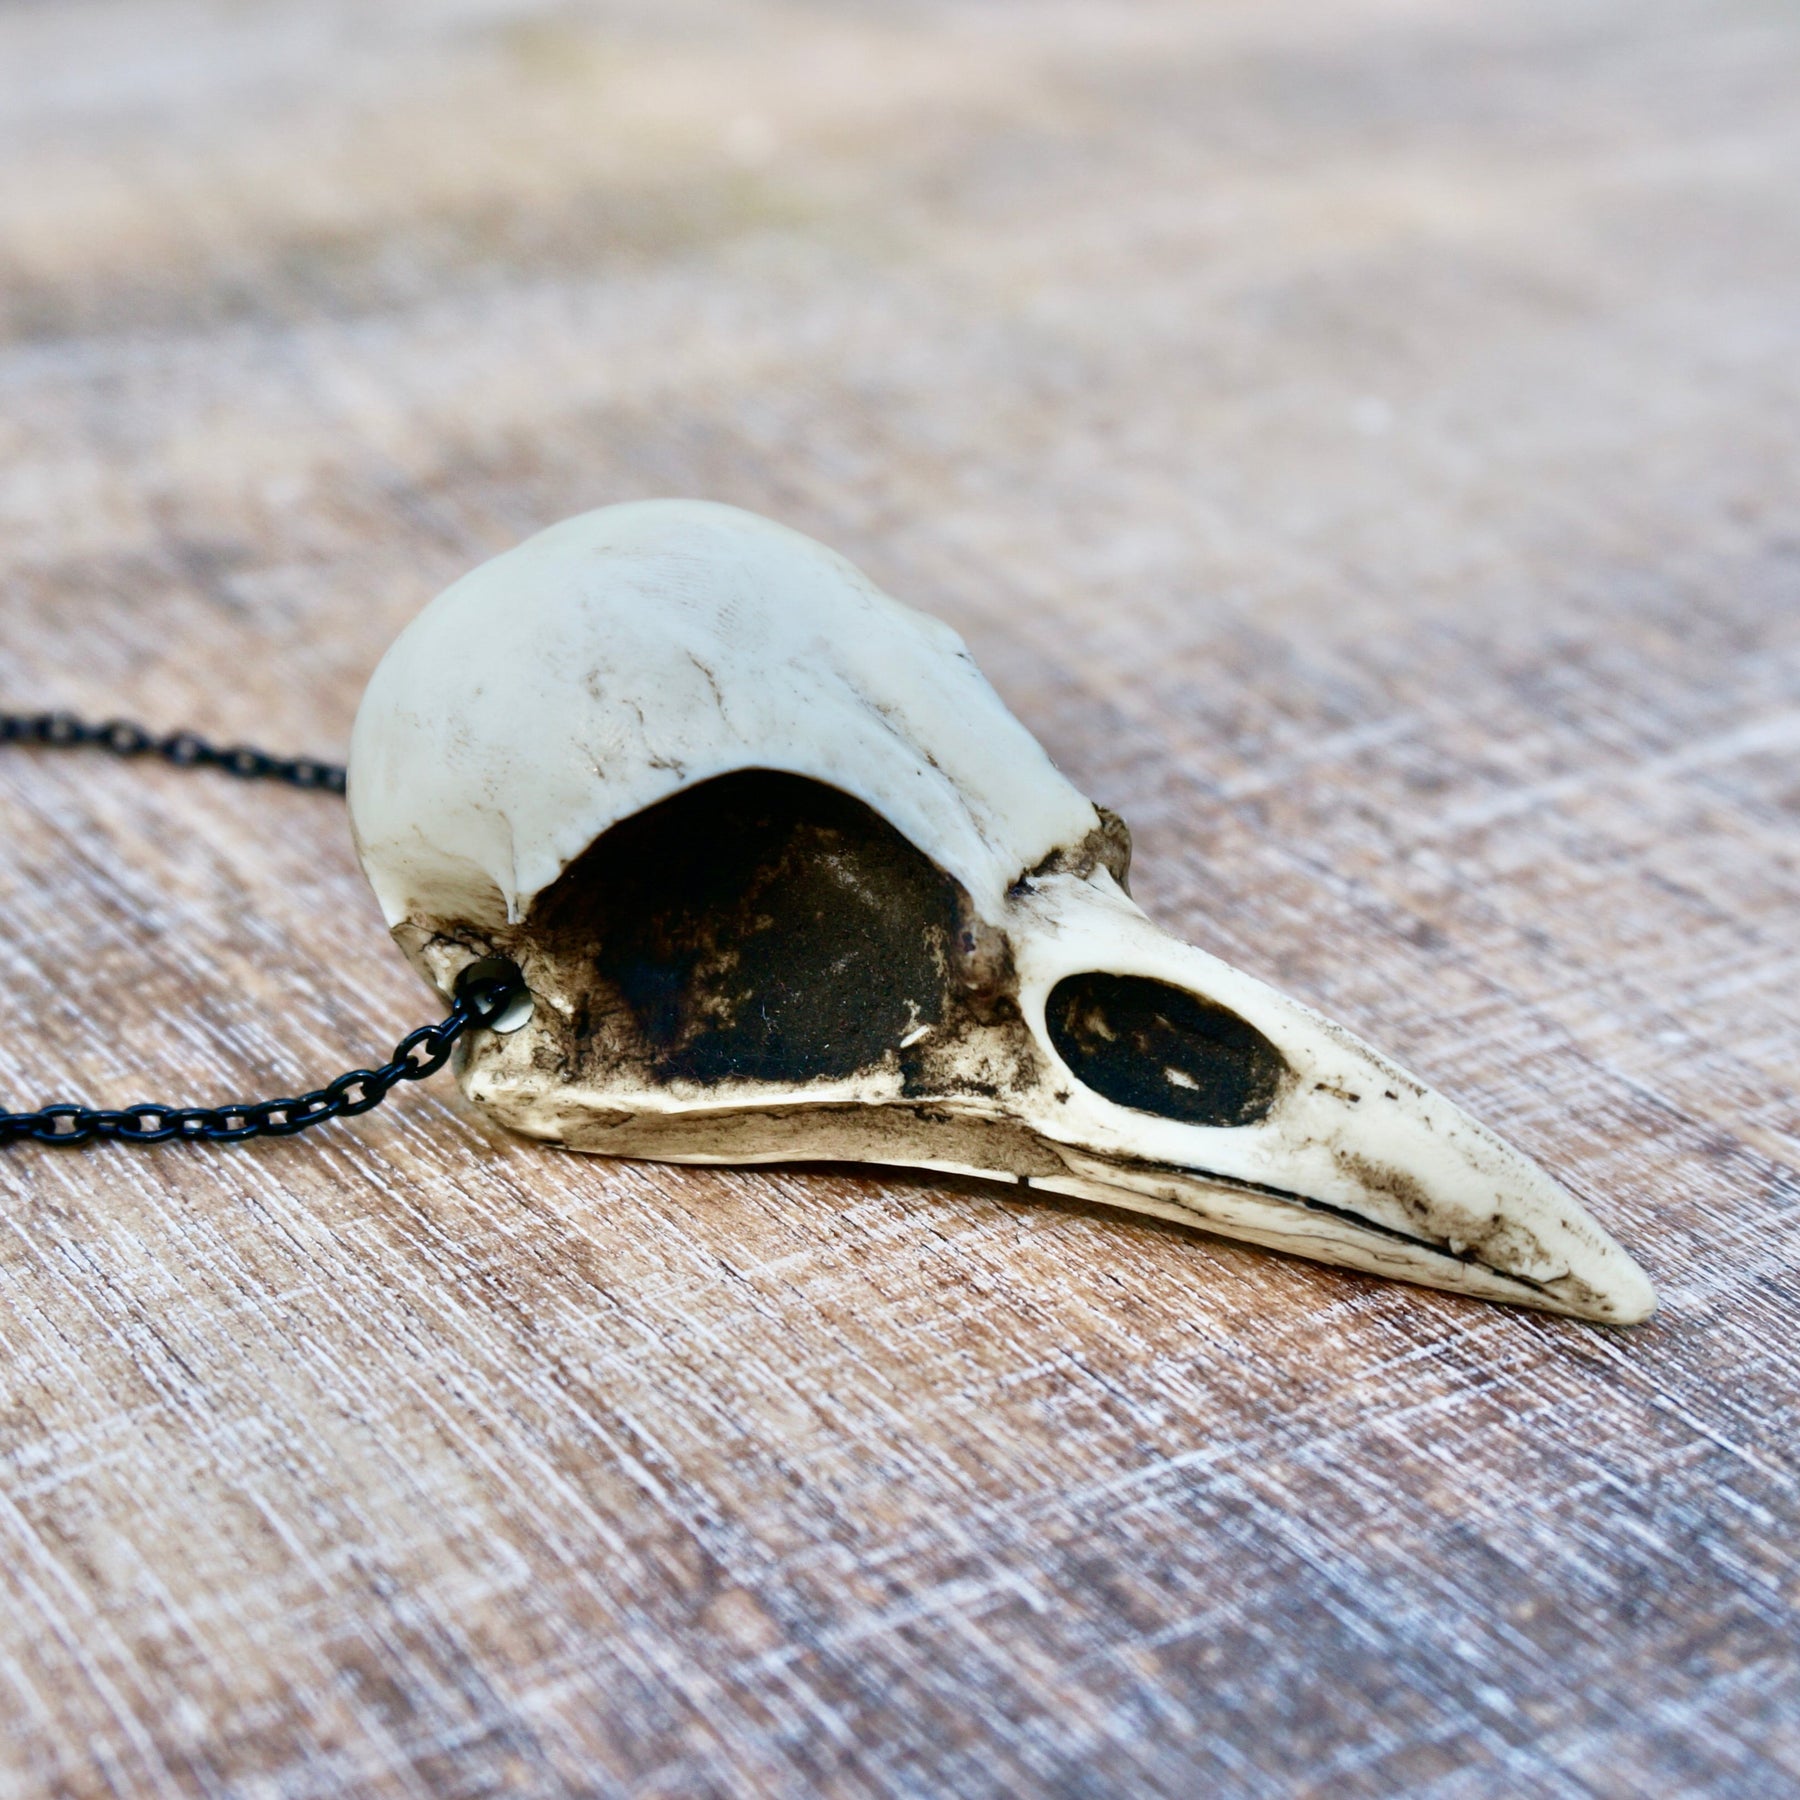 Dirty aged crow skull necklace bird skull jewelry for witchy gothic women or men that like creepy goth Halloween accessories.